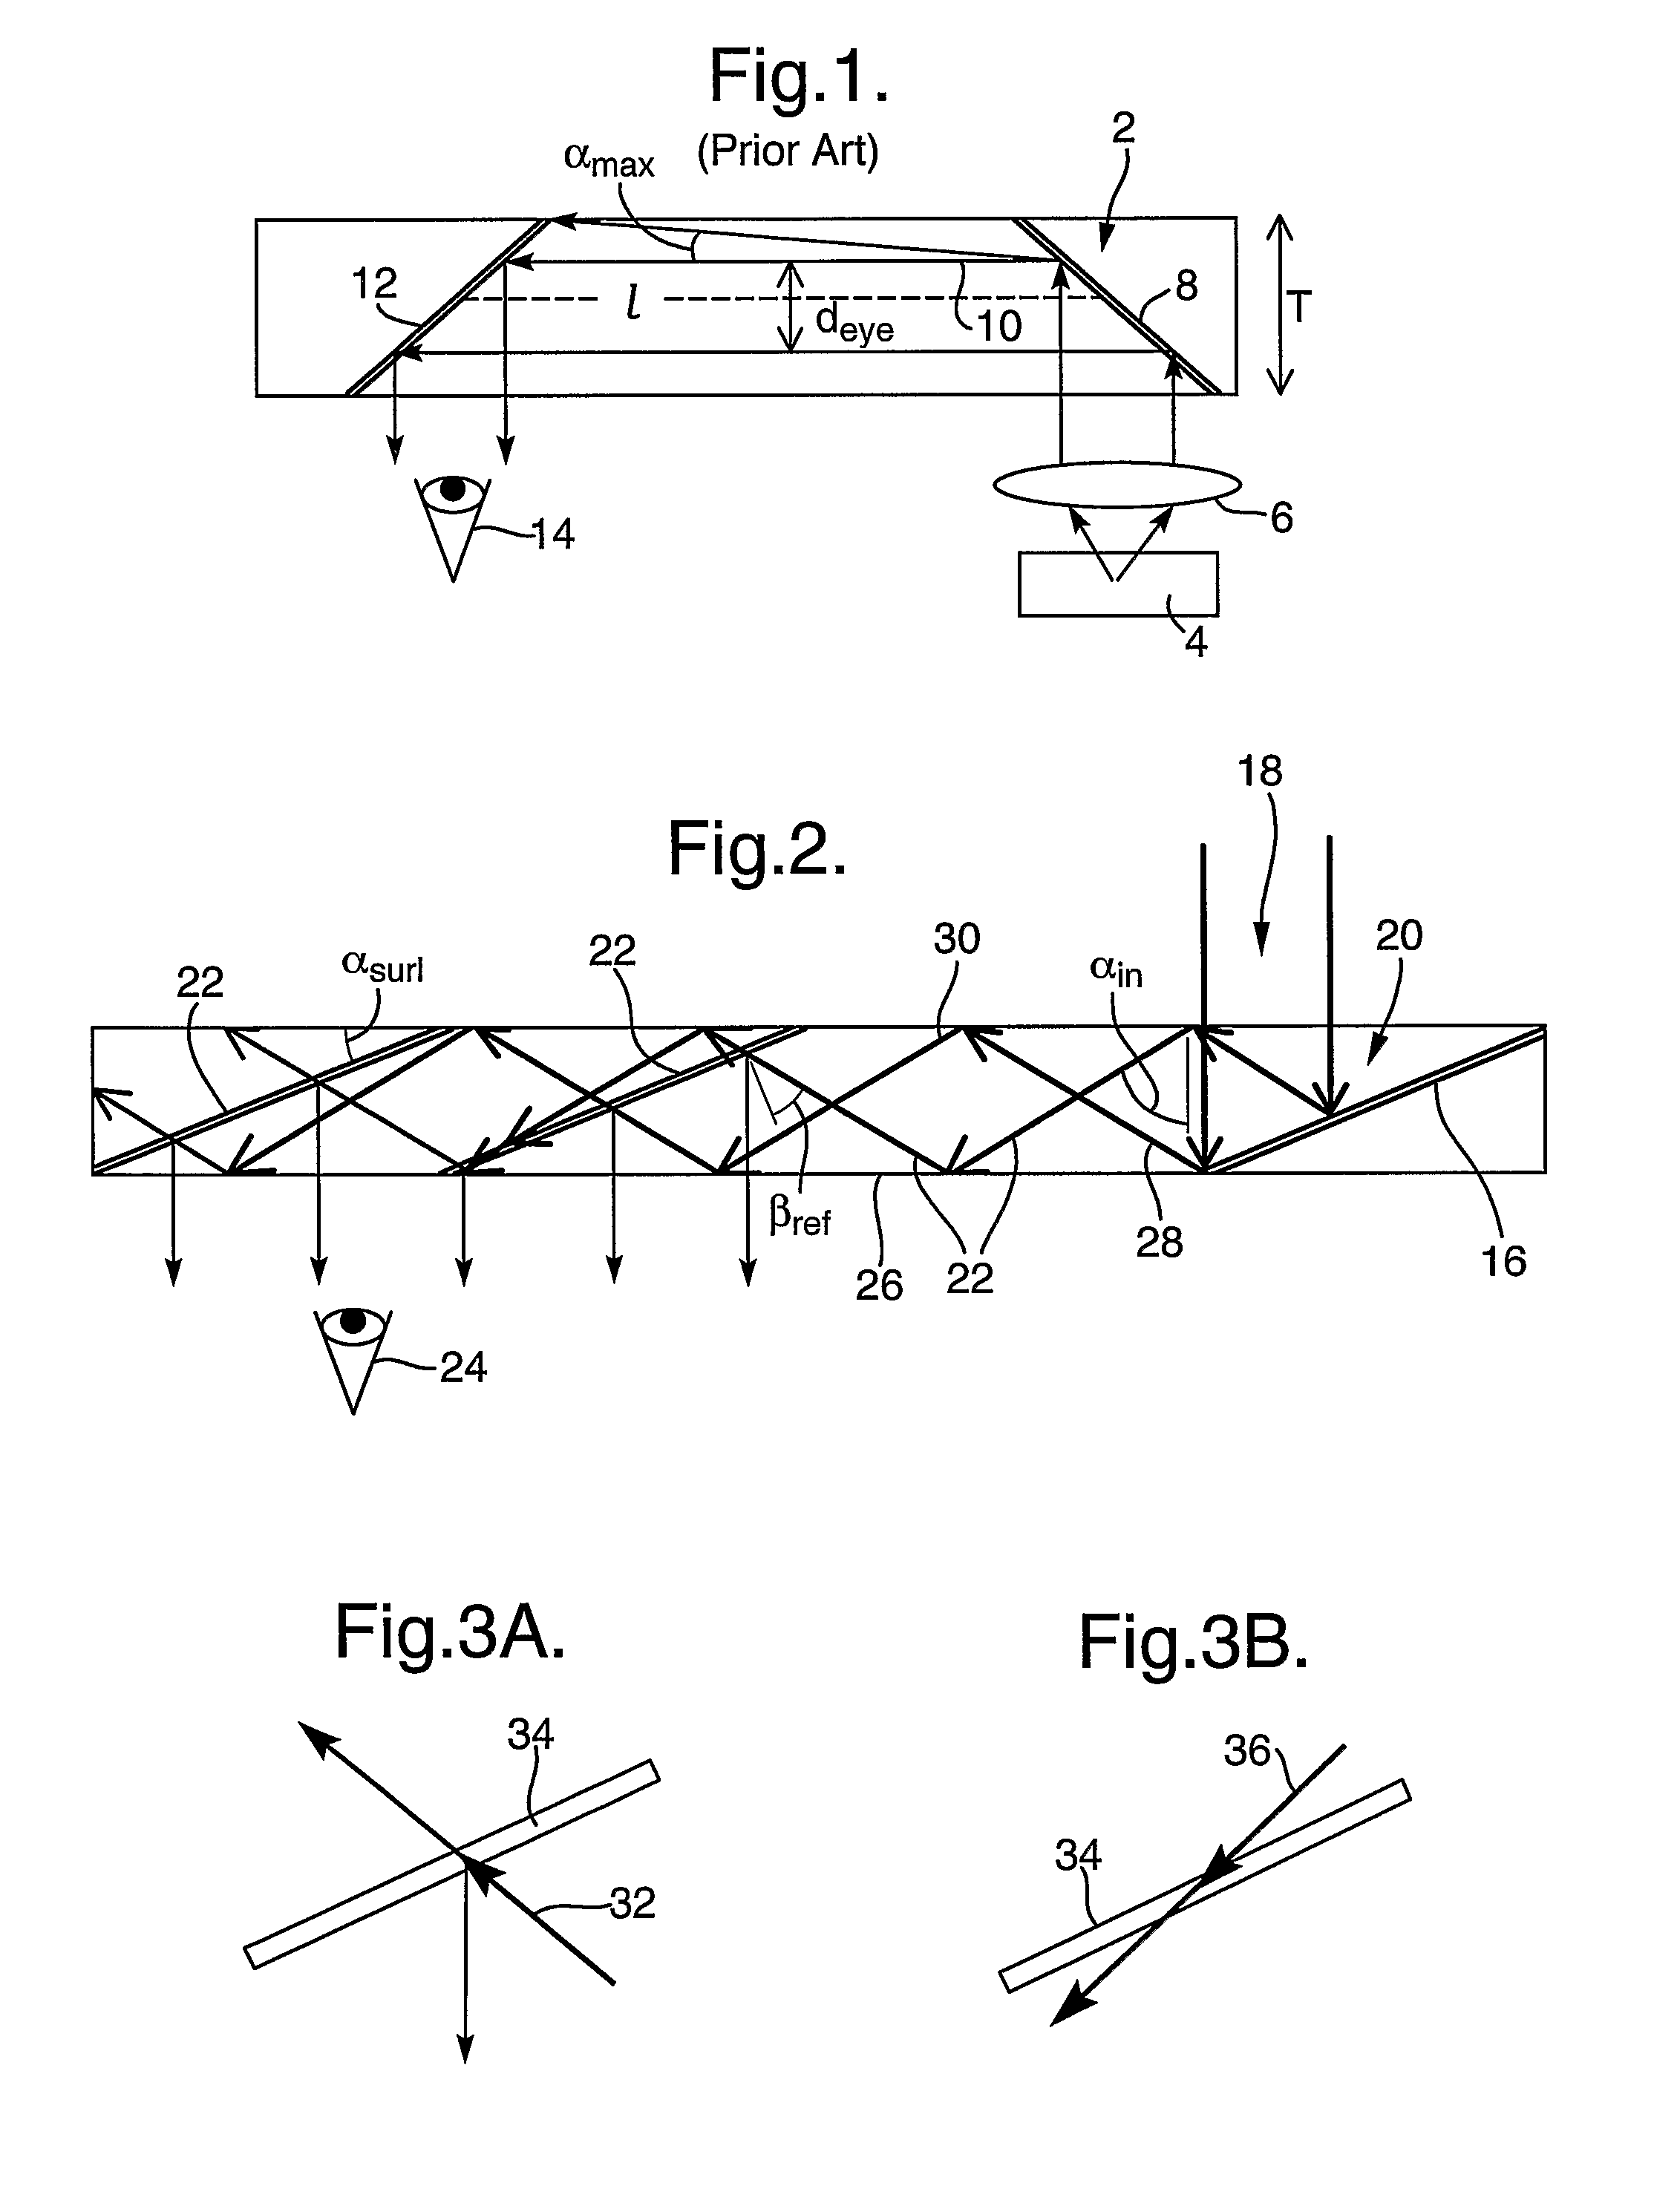 Substrate-Guided Optical Device with Wide Aperture